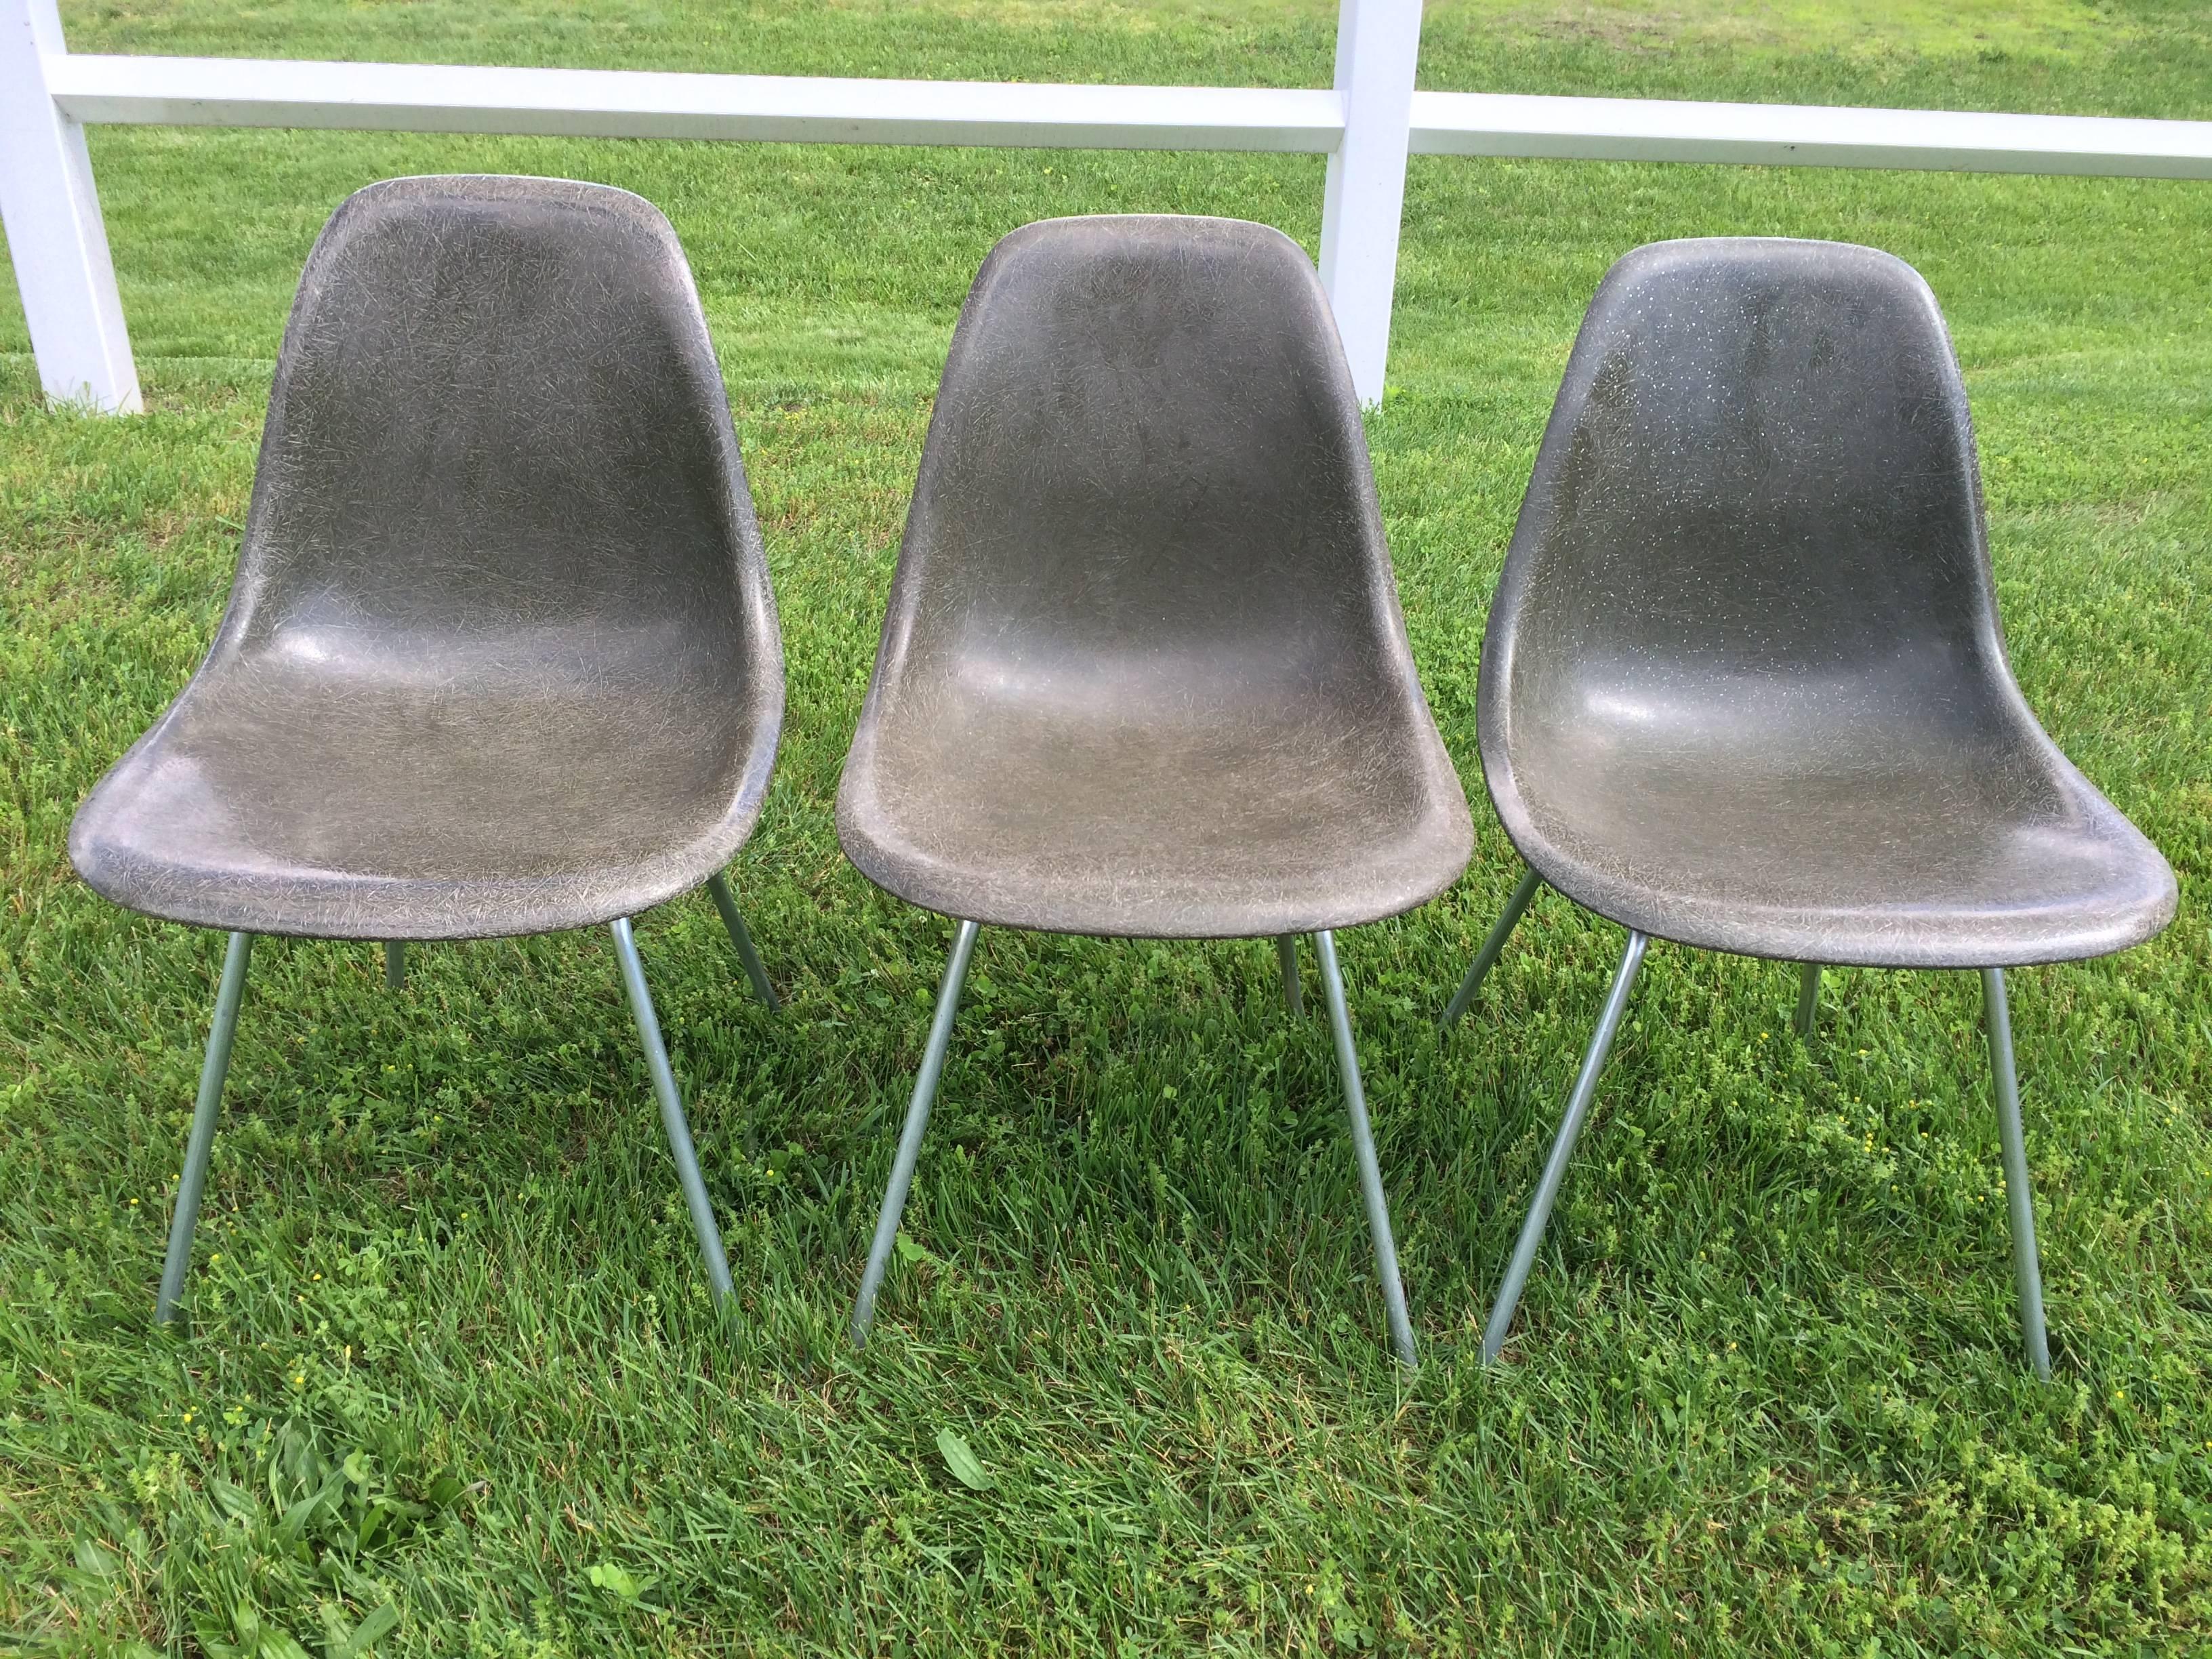 Charles Eames for Herman Miller fiberglass shell side chairs in grey. In very good condition. No chips or damage, just some white paint speckles on the far right chair only of the three. Measures: 31.5 in H x 18.5 in. W x 21 in.D. Classic Minimalist